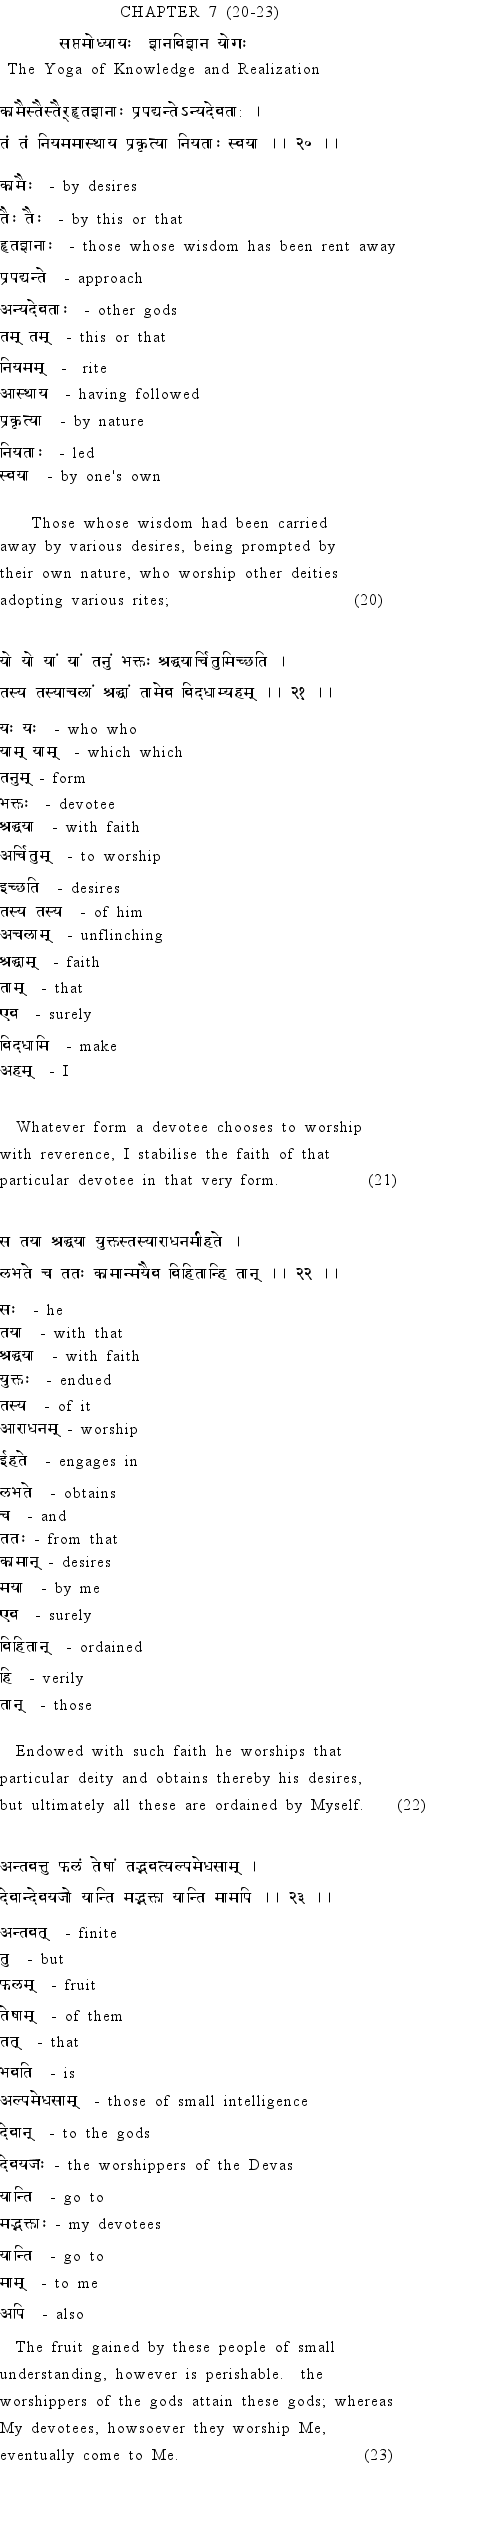 Text of Ch.7_4